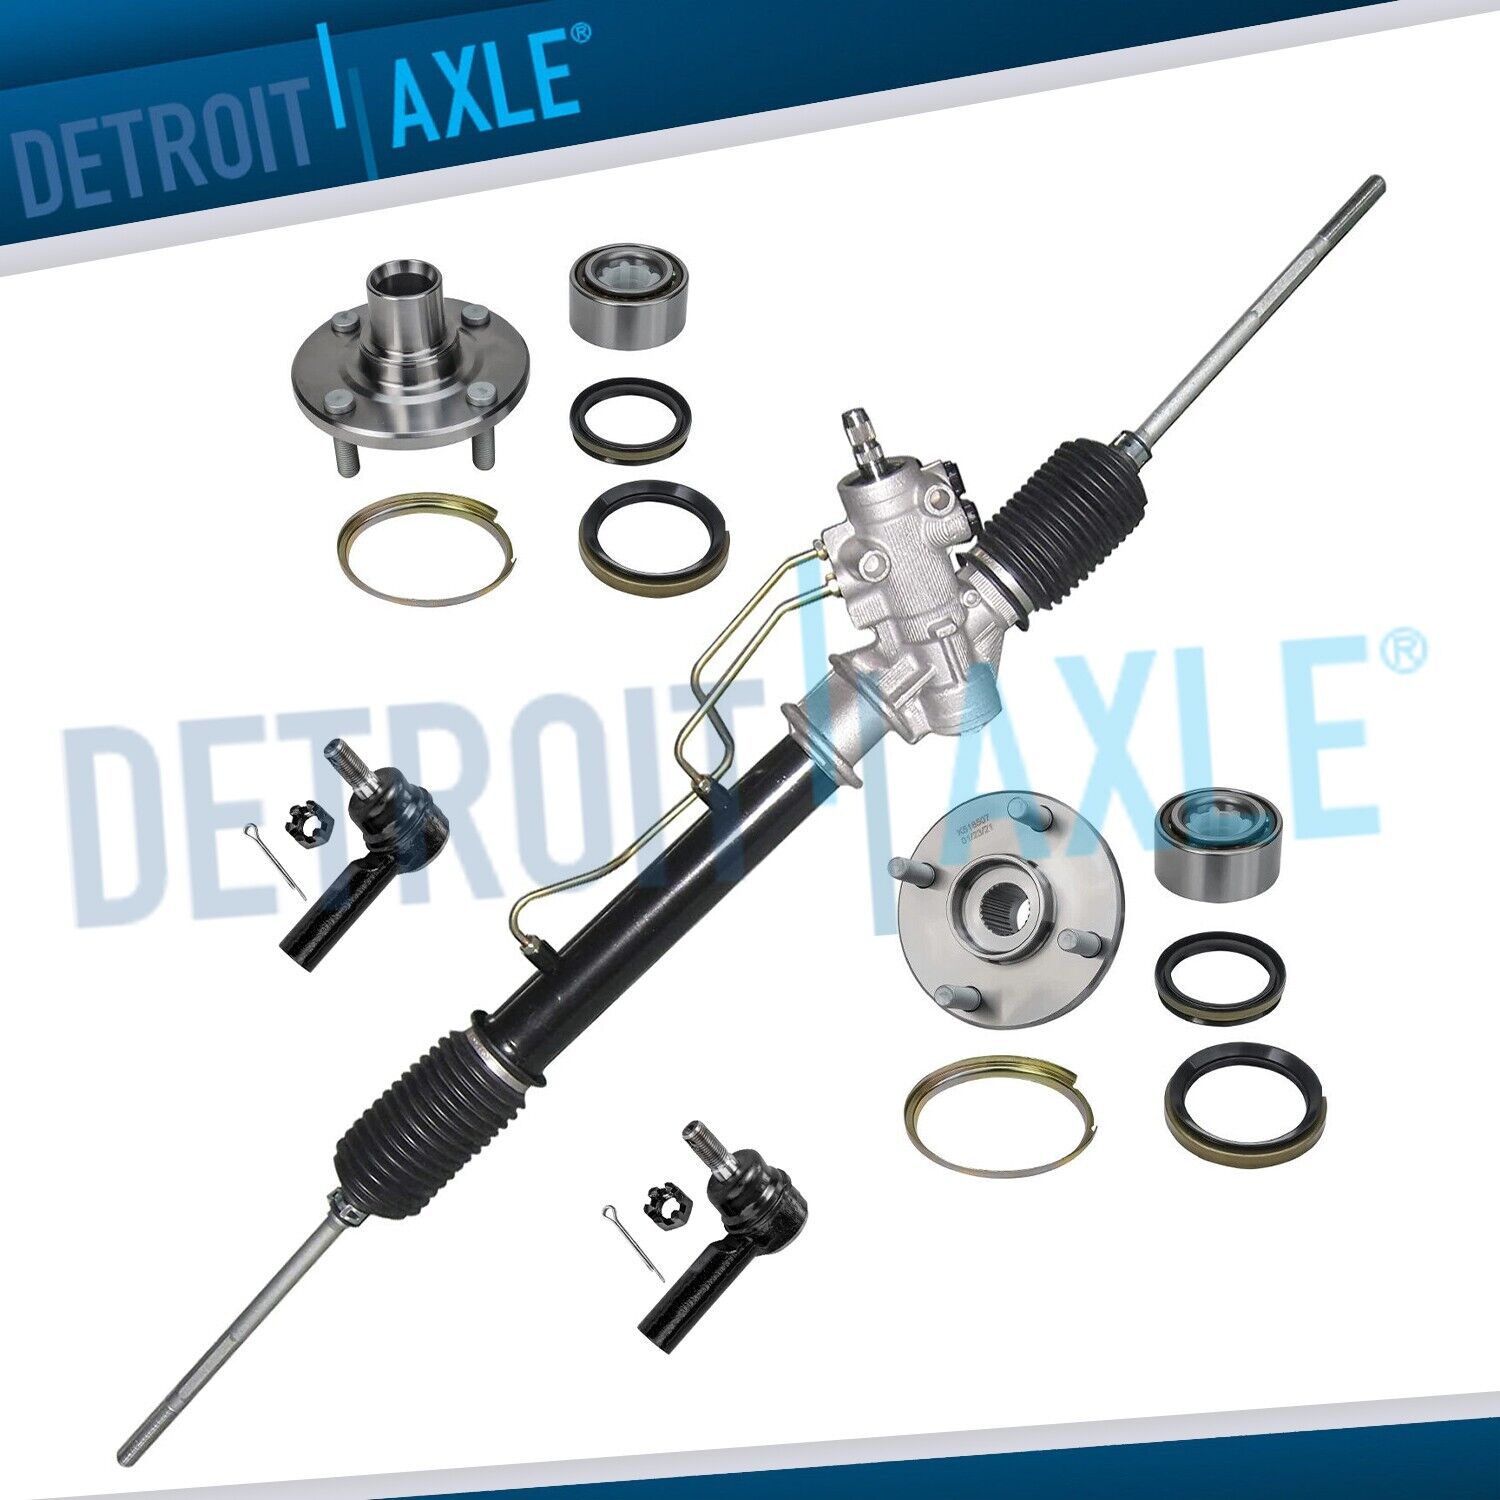 5pc Kit: Rack and Pinion + Wheel Hub Bearings + Tie Rod Ends for Prizm Corolla